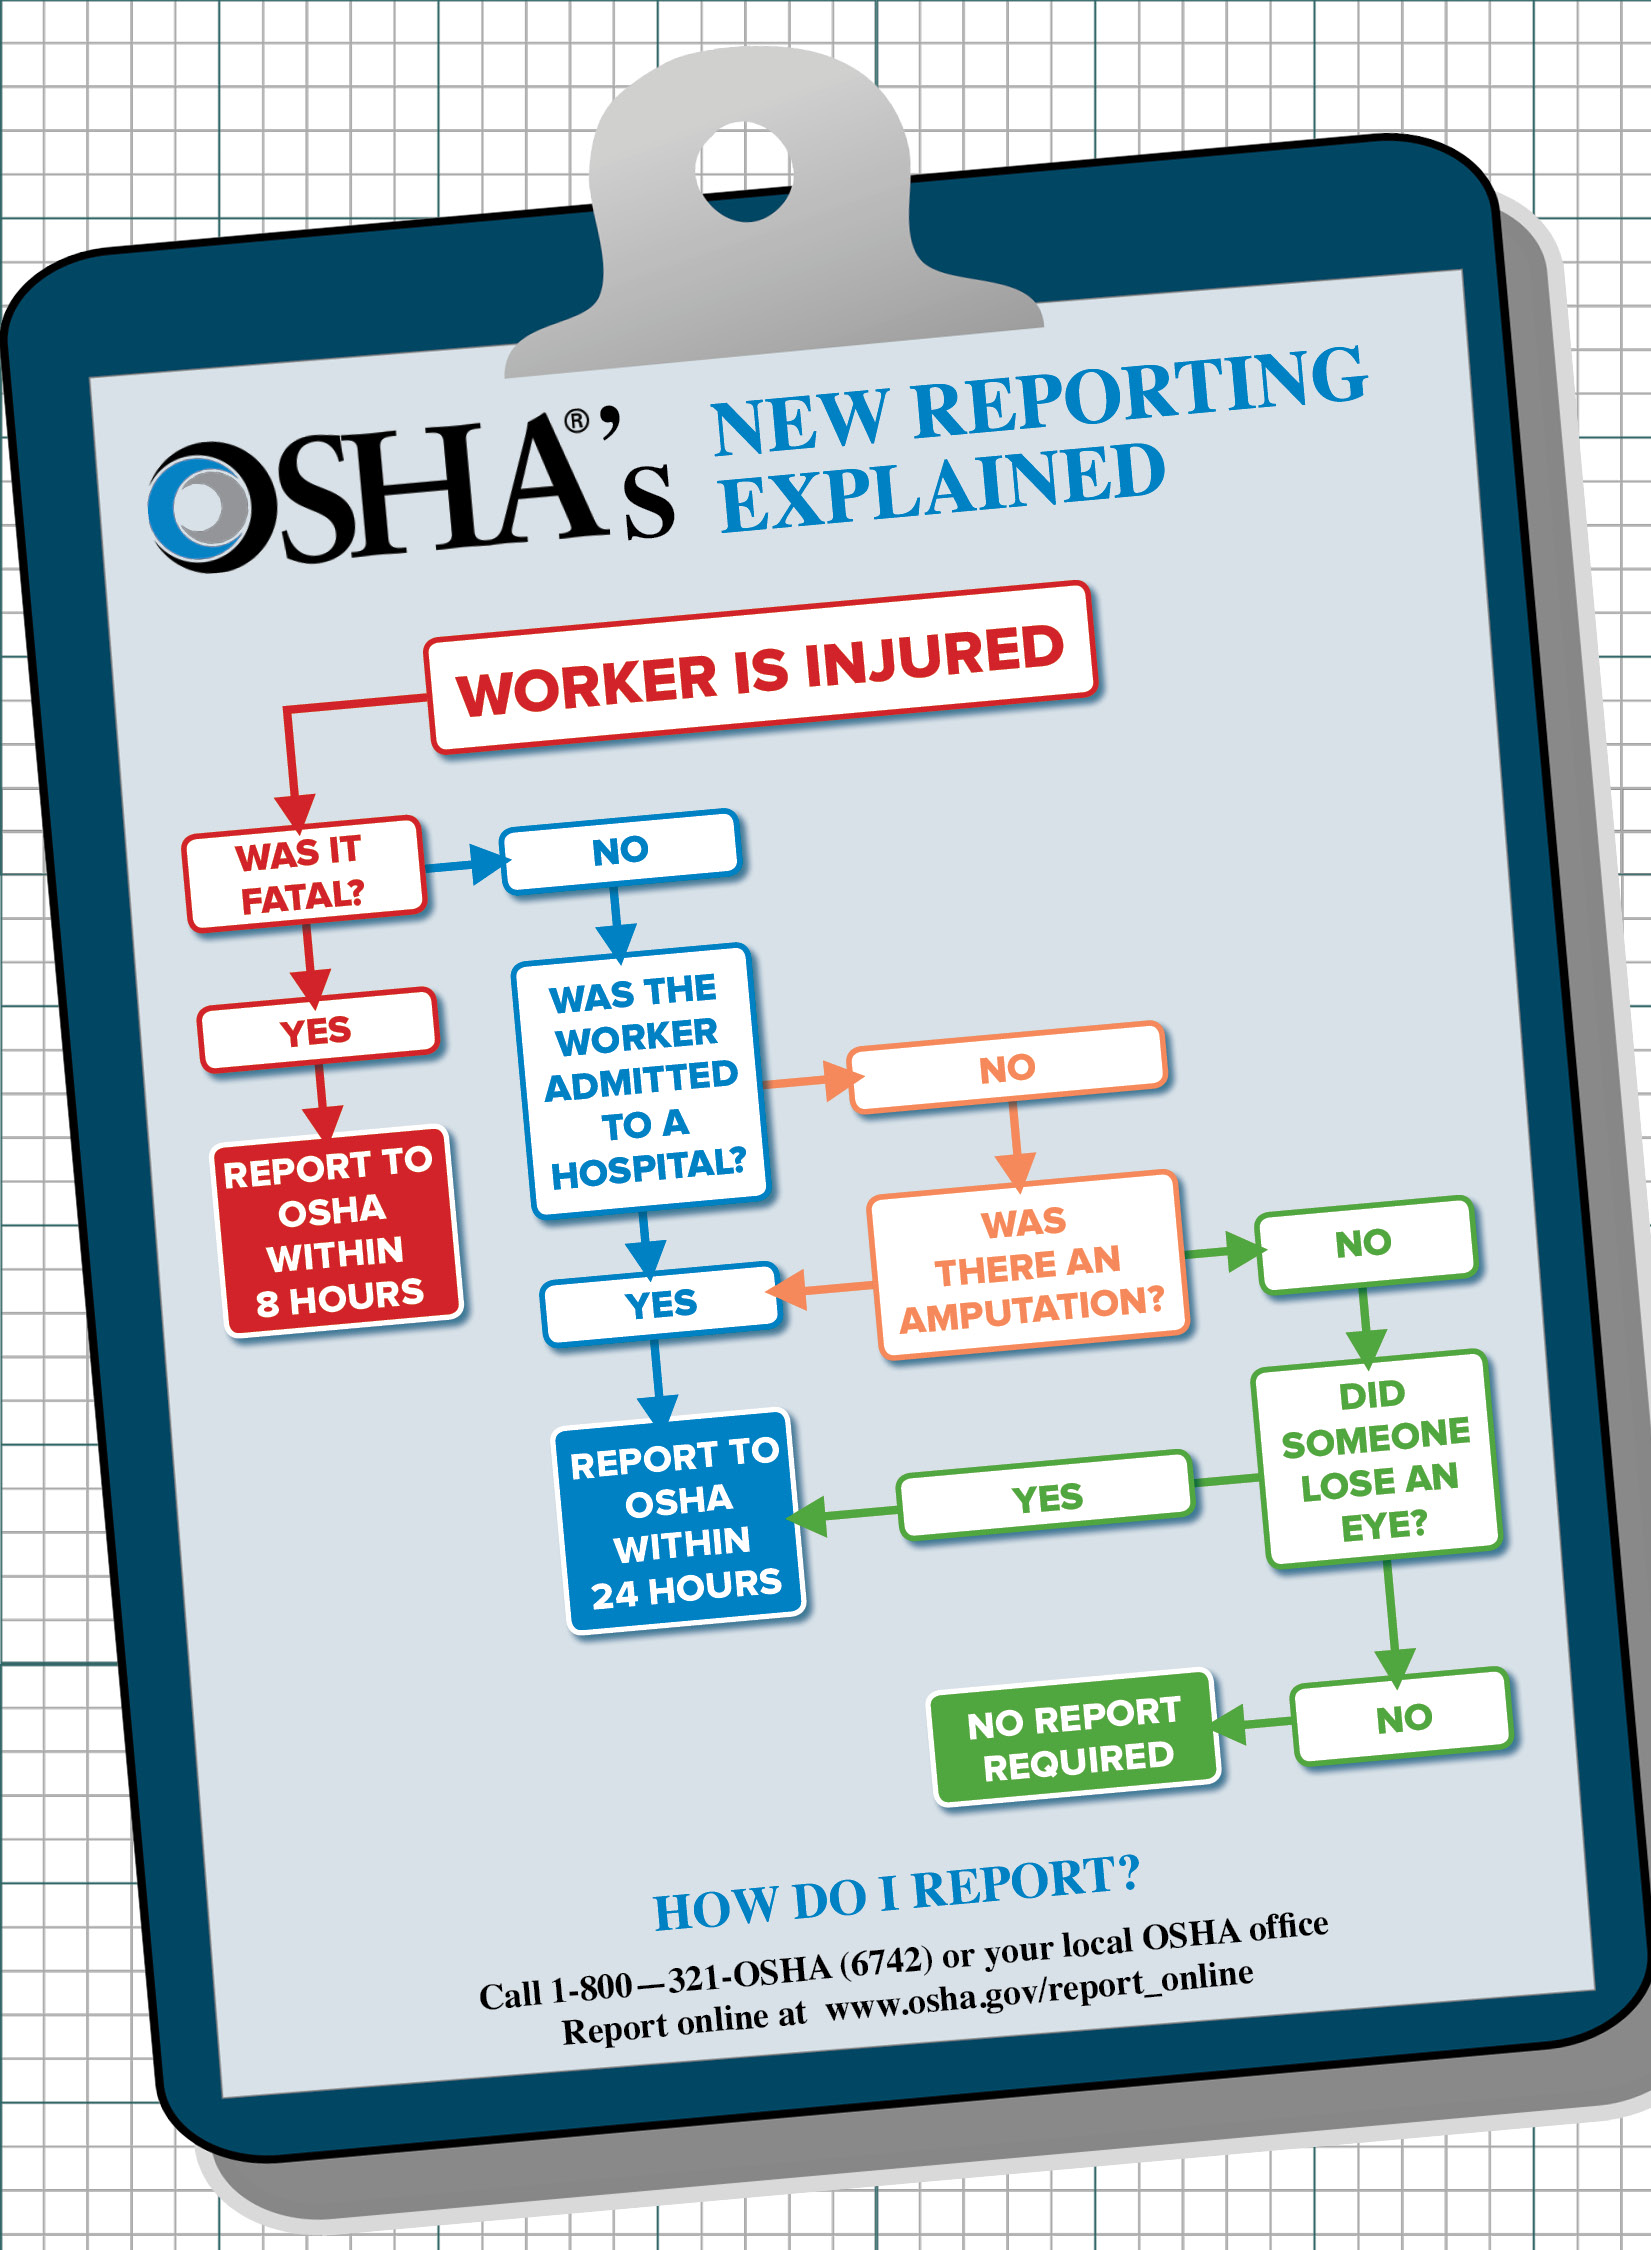 New OSHA Reporting Requirements Go into Effect January 1